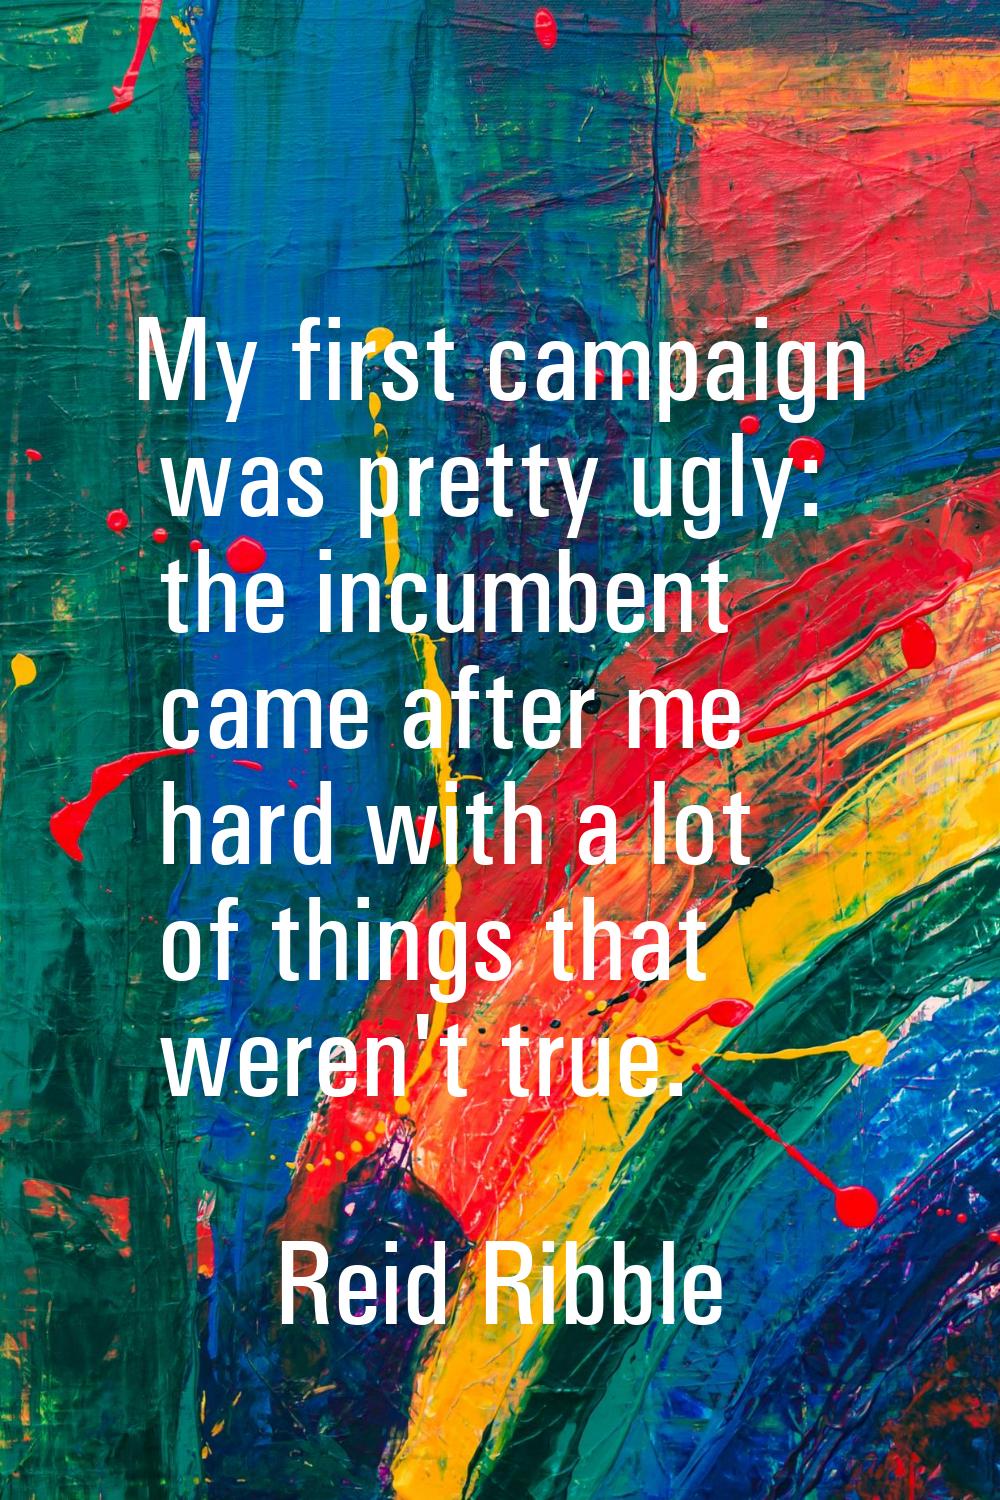 My first campaign was pretty ugly: the incumbent came after me hard with a lot of things that weren